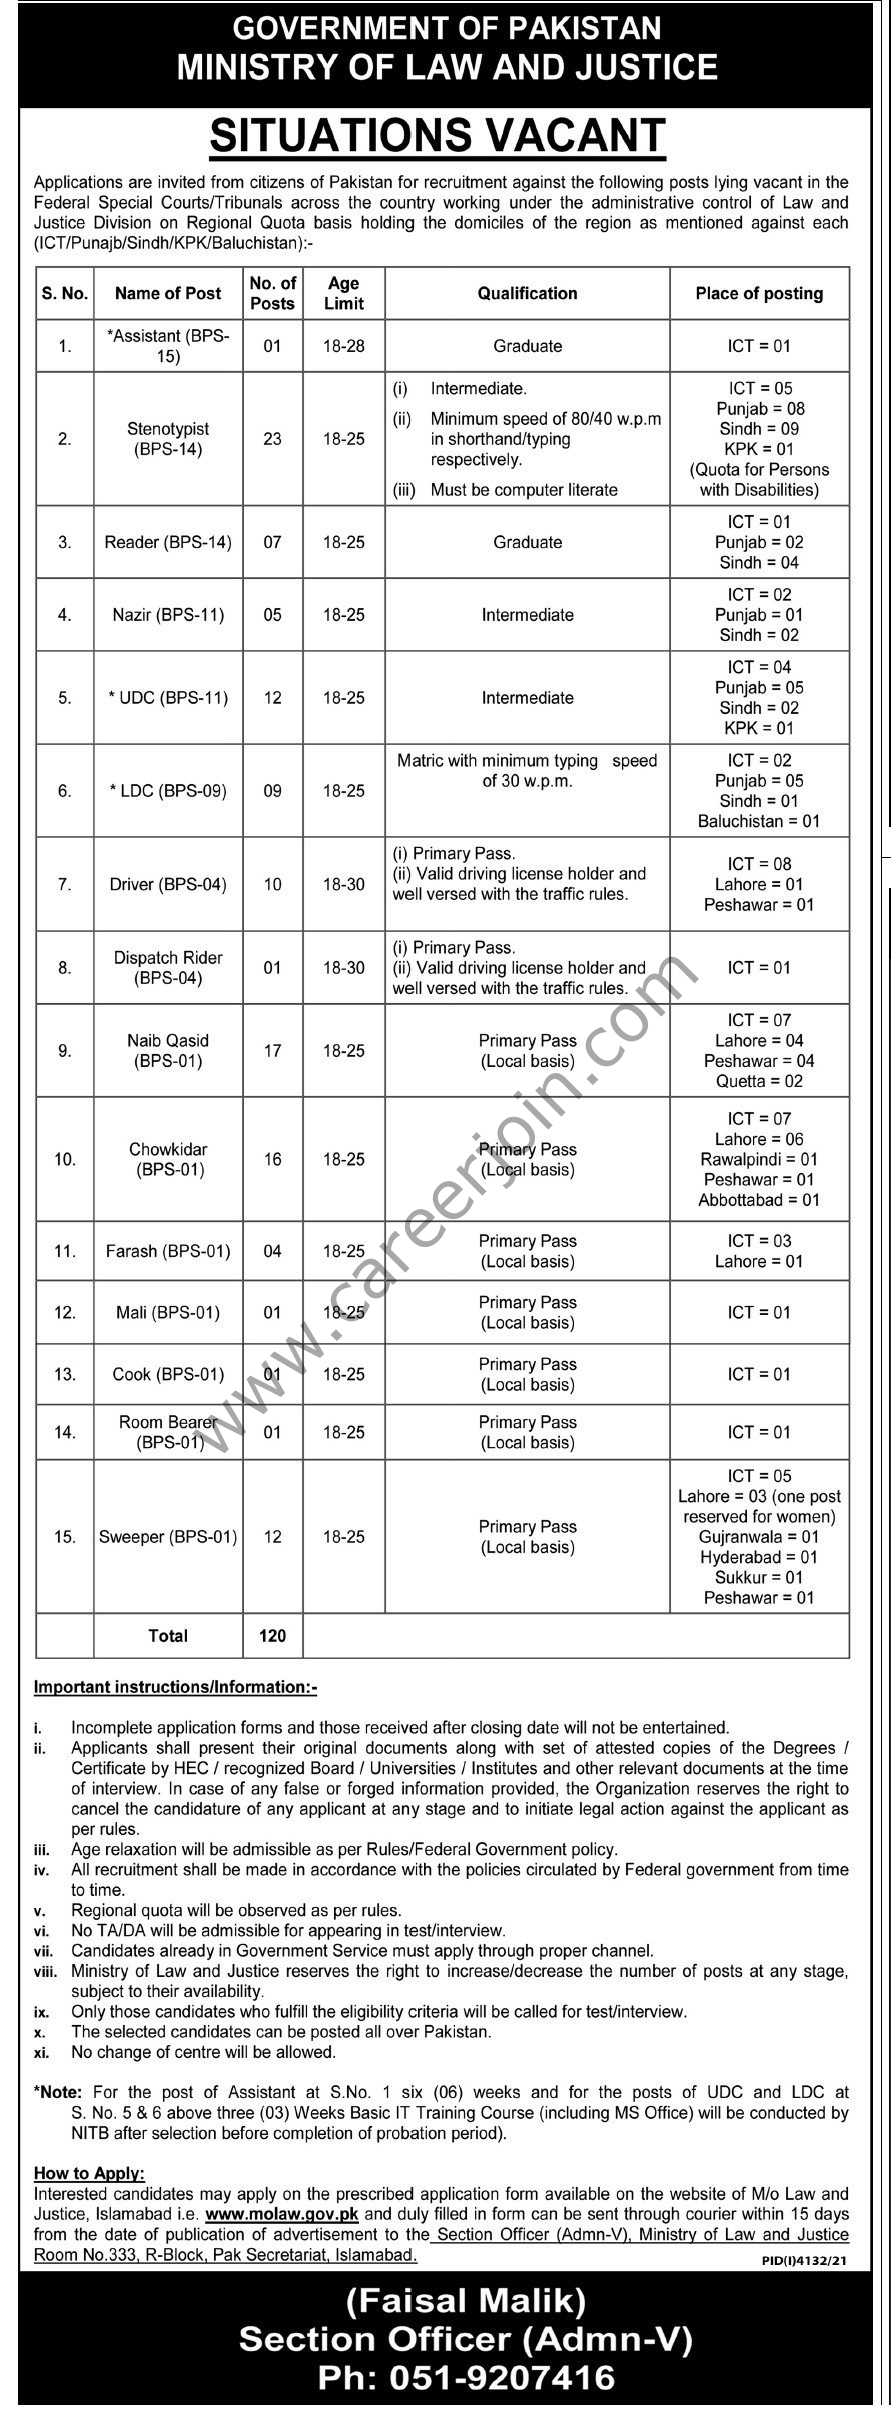 Ministry Of Law & Justice Jobs December 2021